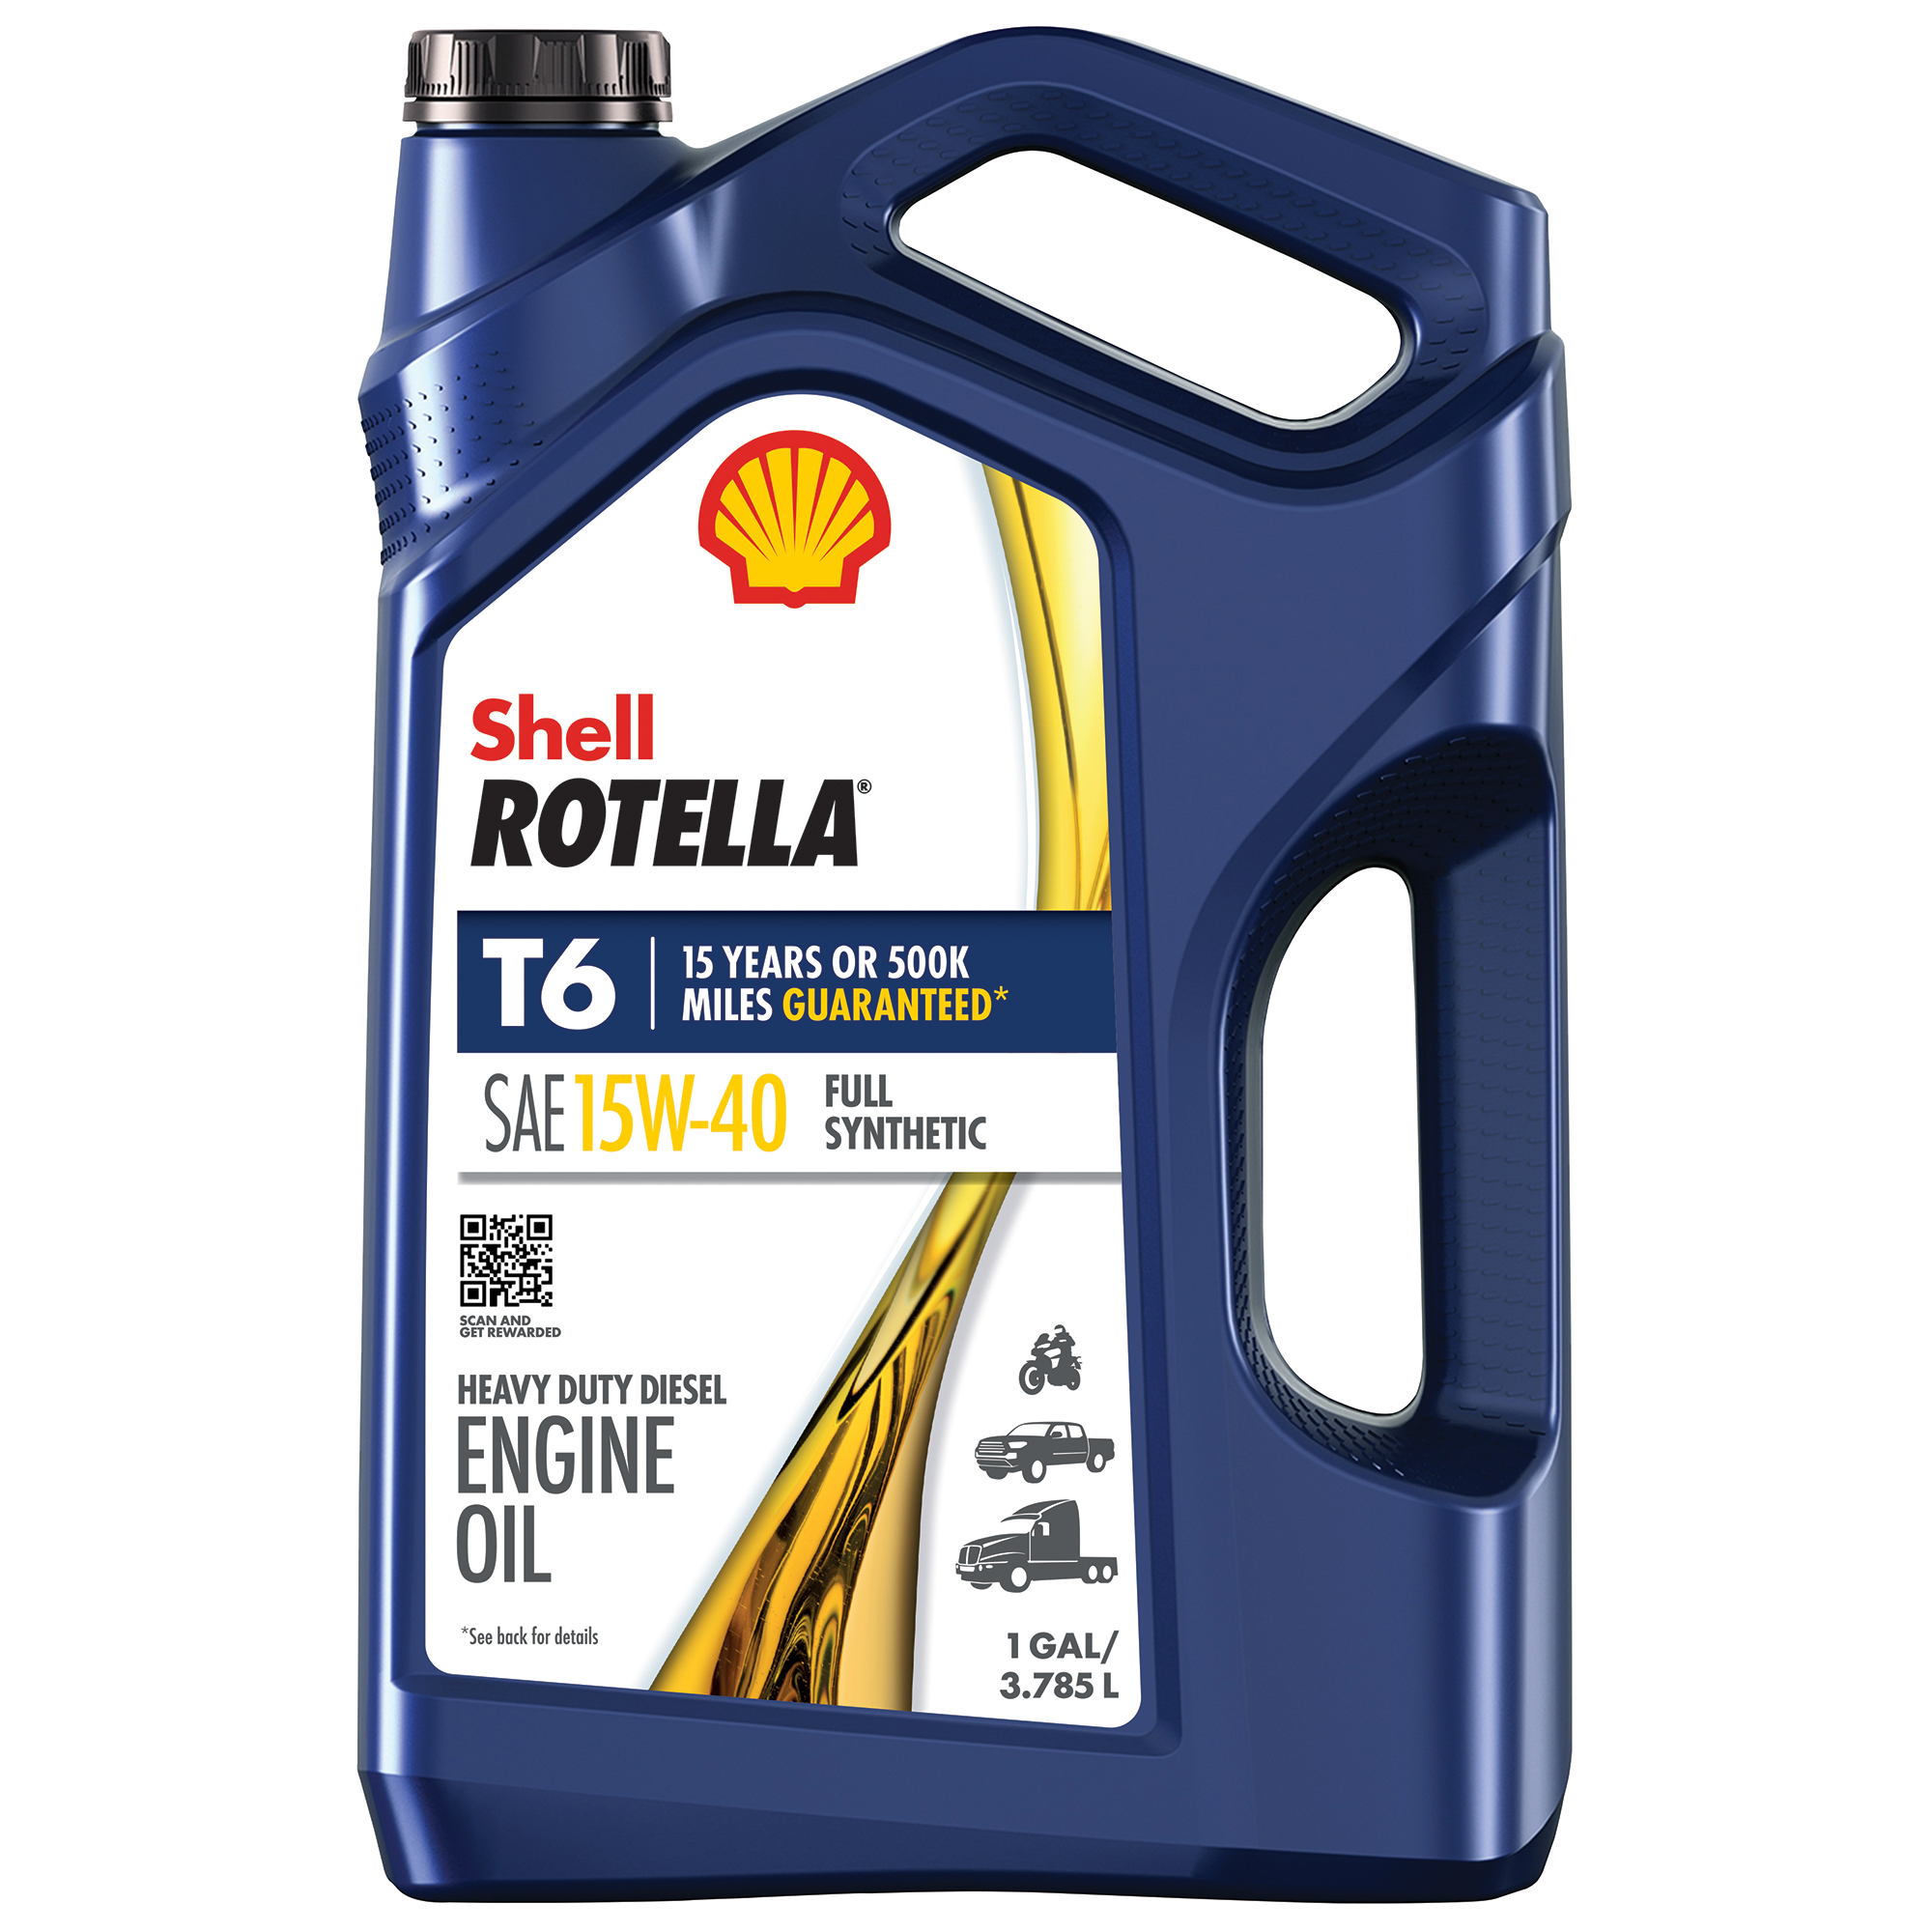 Shell Rotella T6 Full Synthetic 15W-40 Diesel Engine Oil, 1 Gallon - image 1 of 9